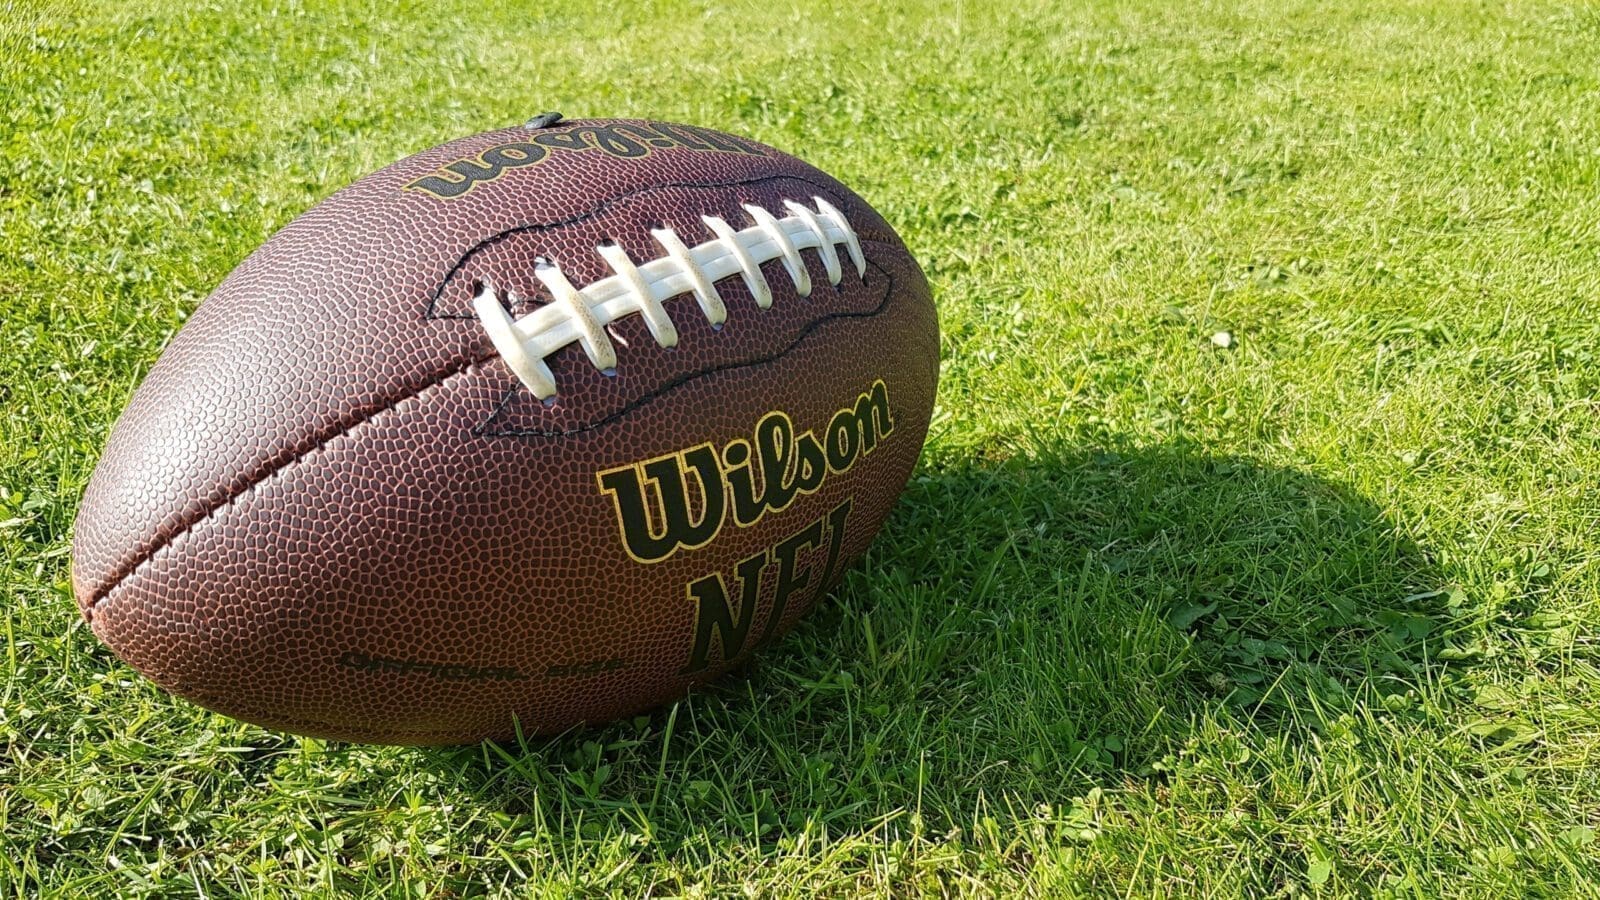 nfl ball generic scaled